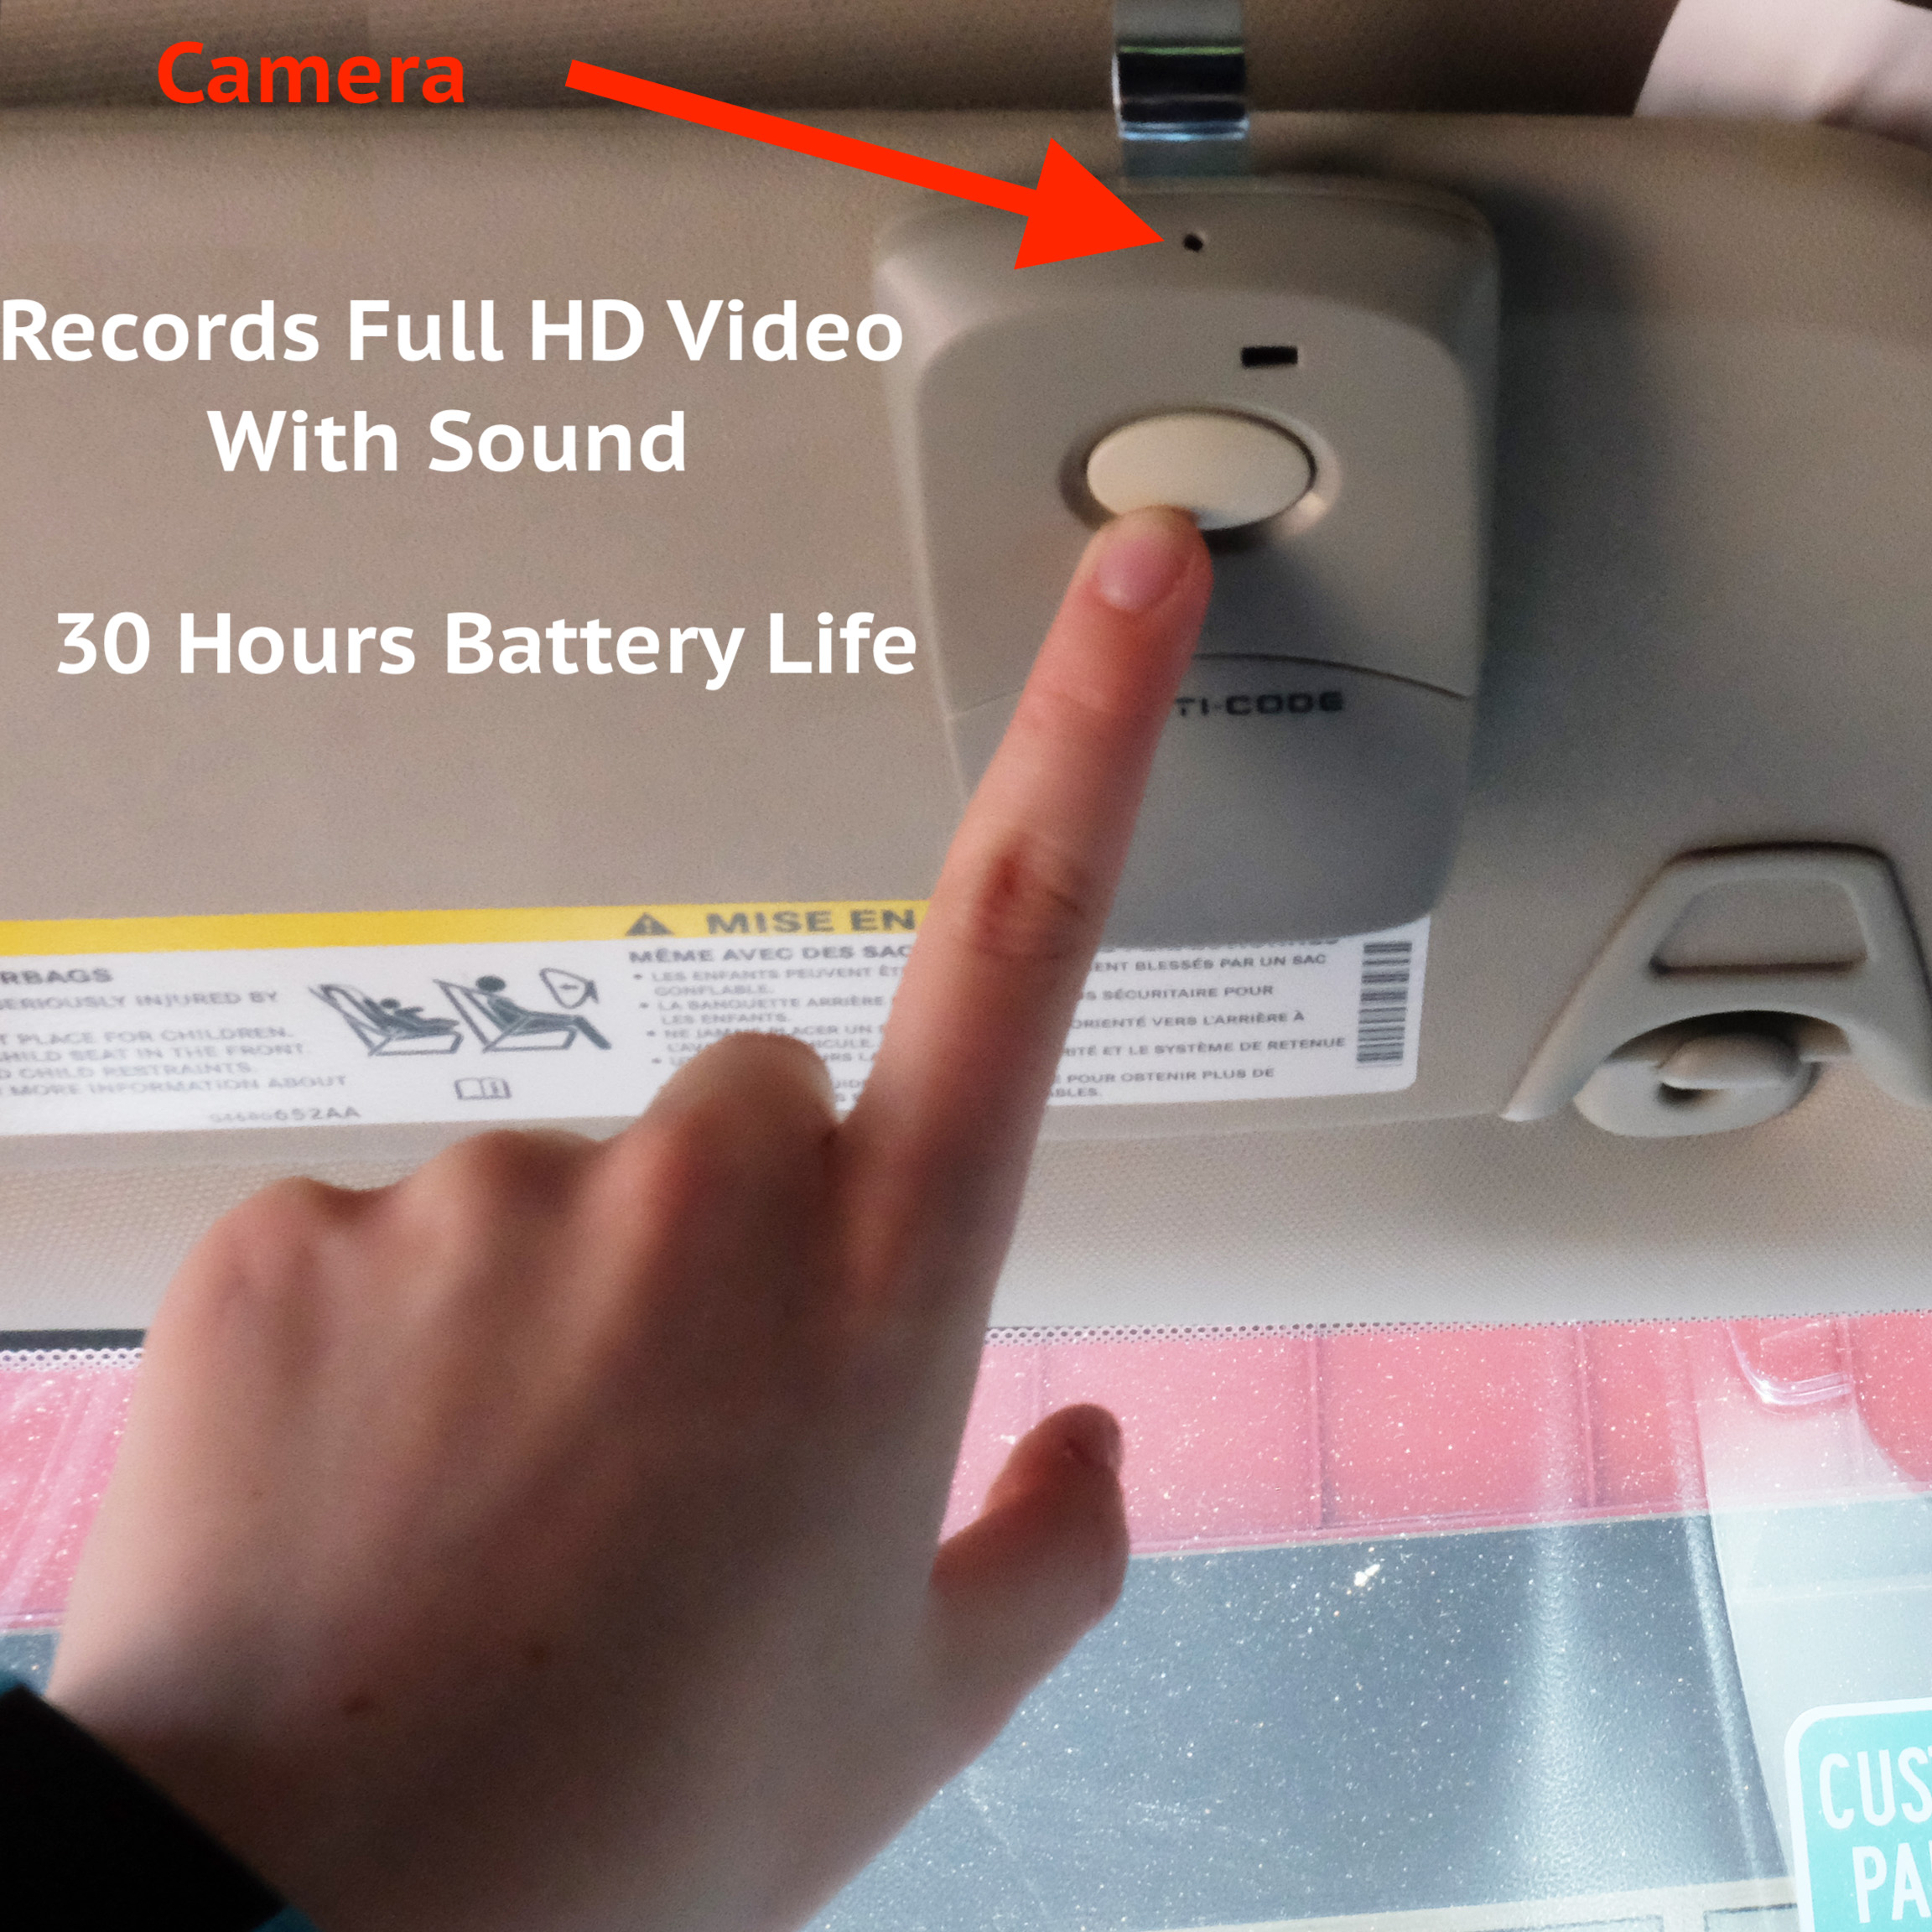 spy camera for car with audio